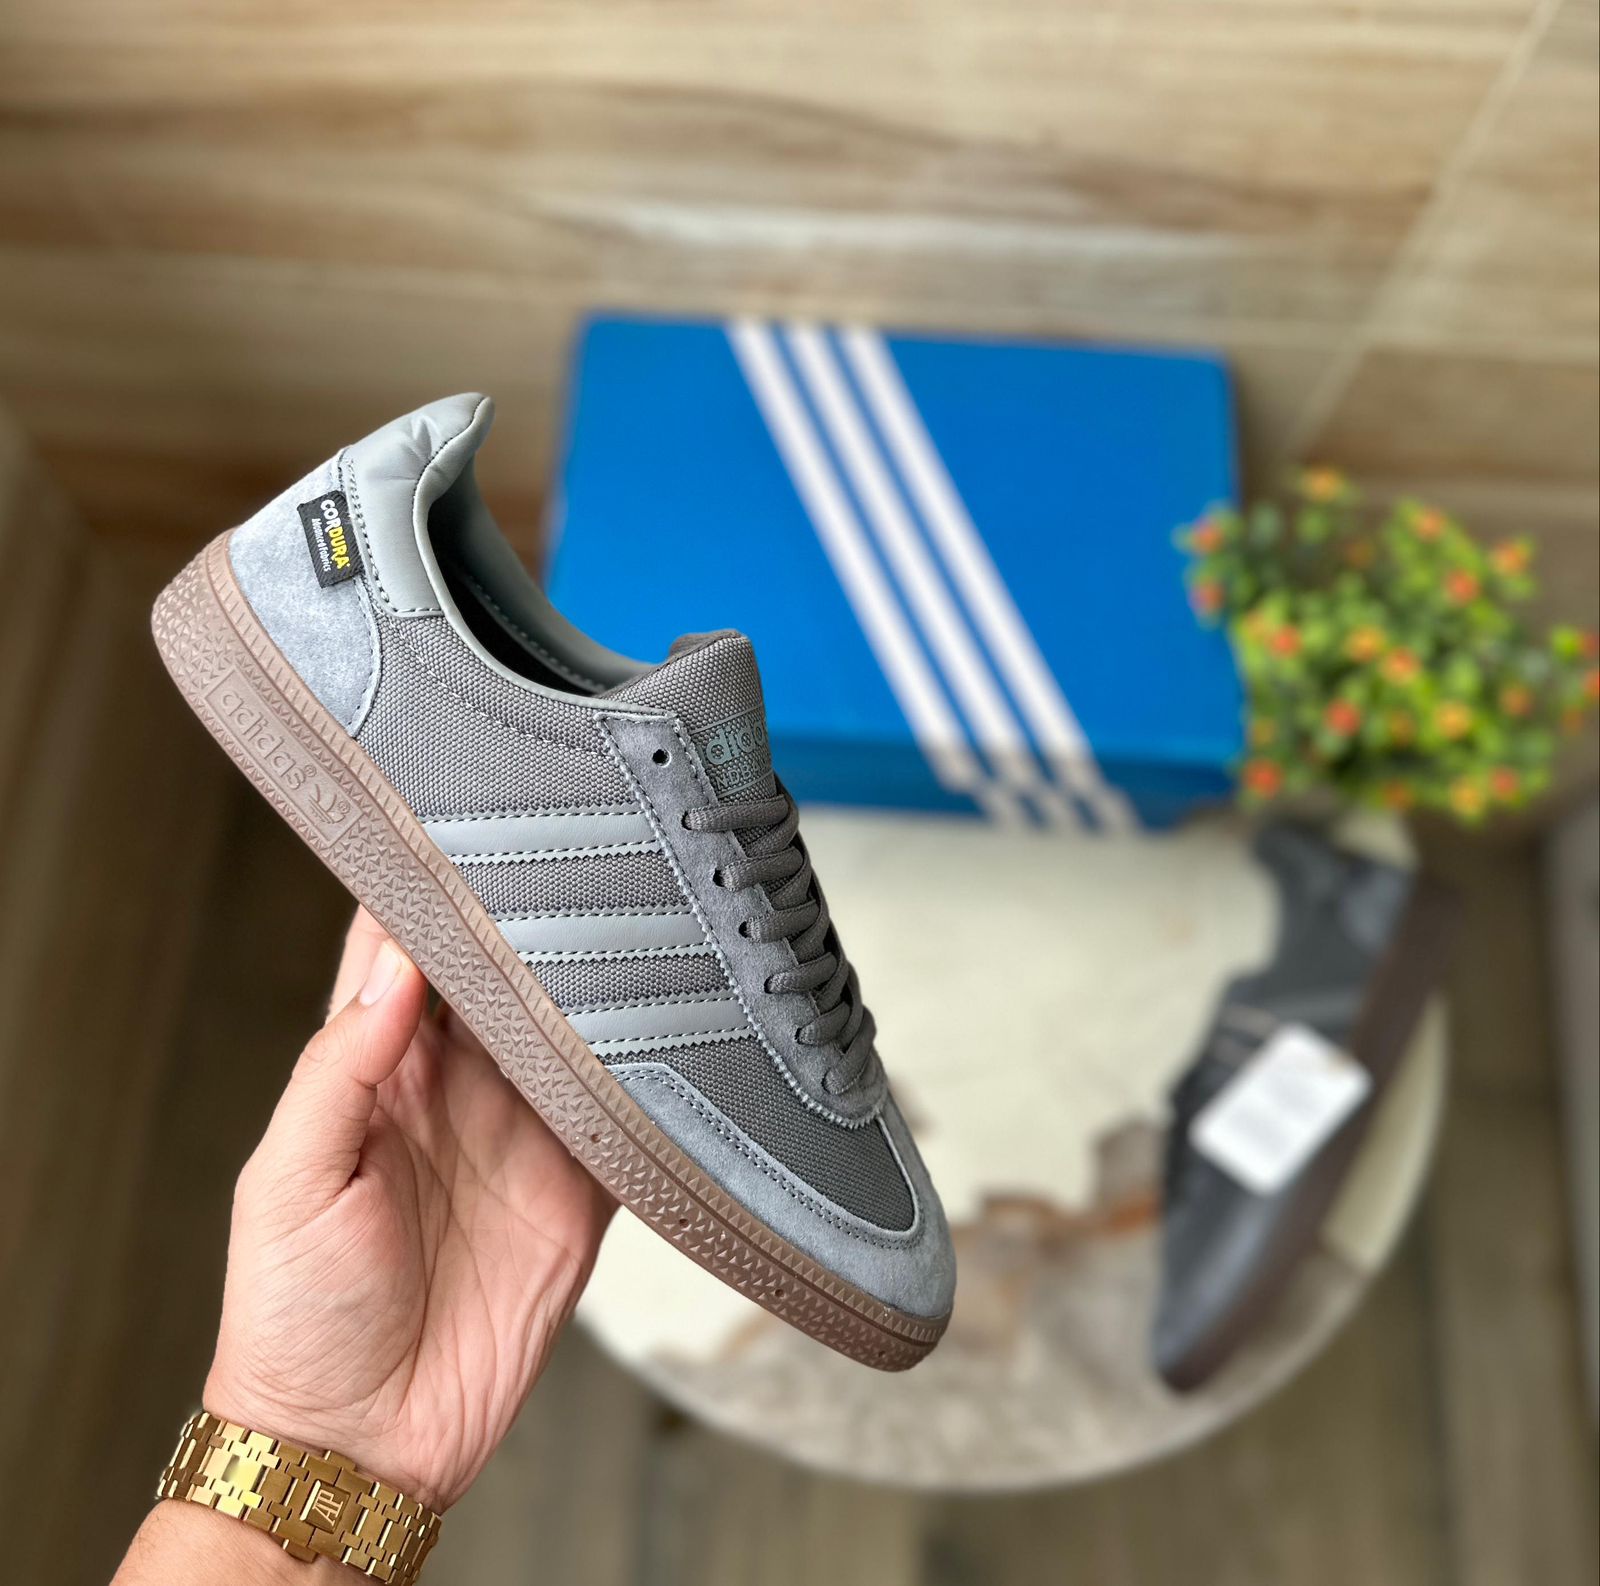 Spezial Grey Sneaker Imported For Boys